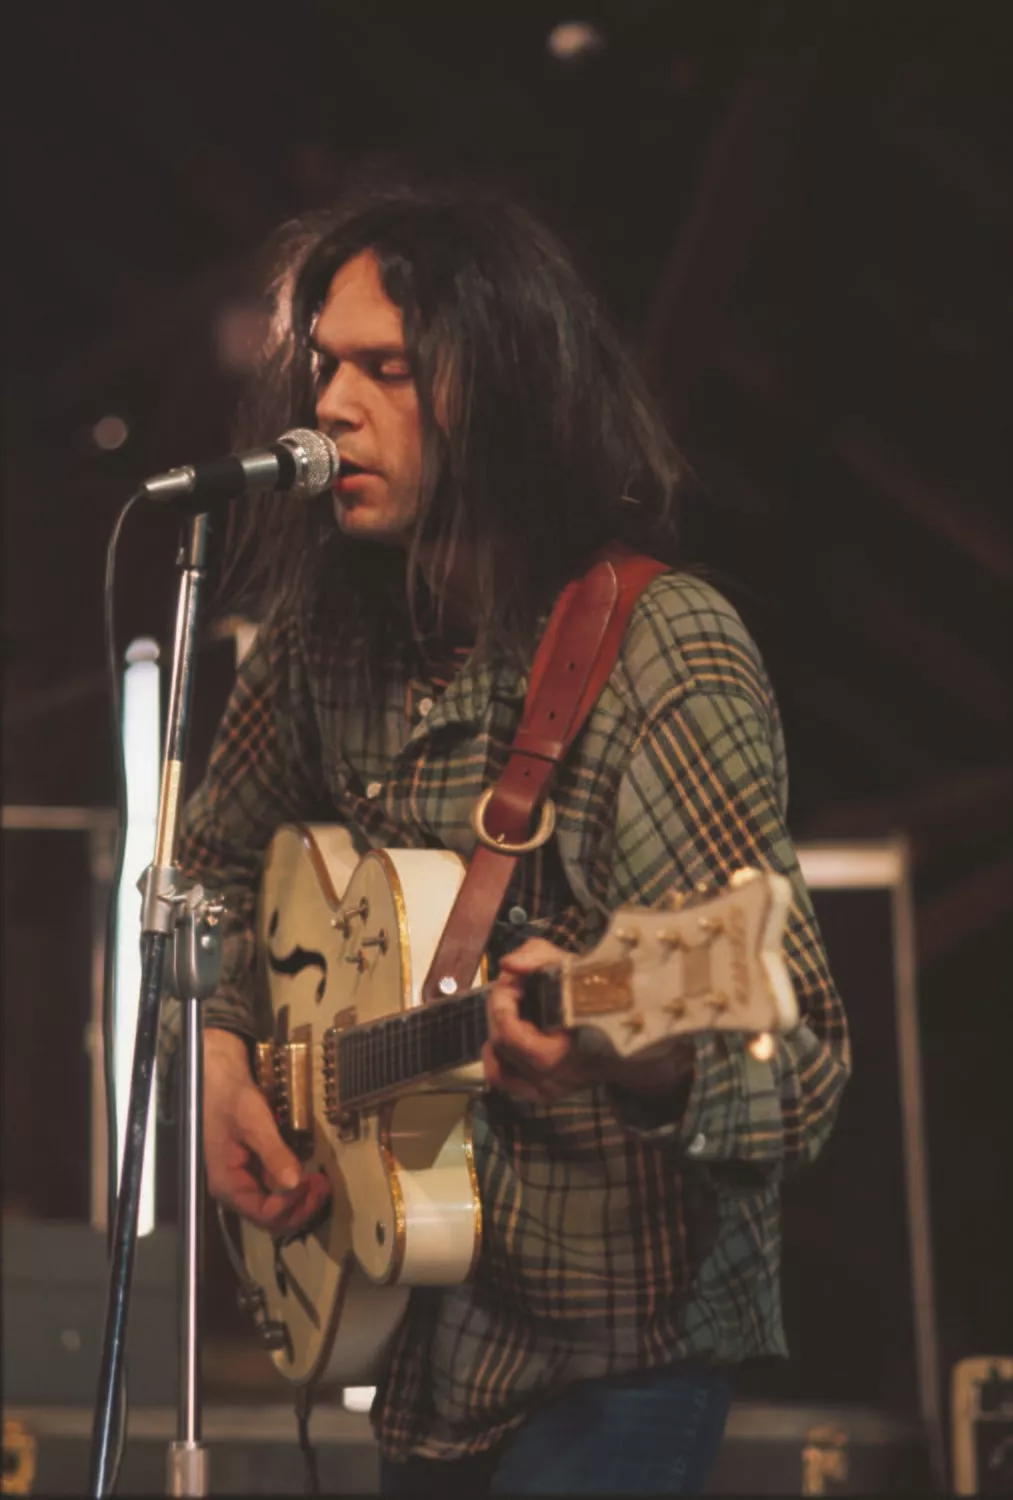 Neil Young: Neil Young Archives – Volume I (1963-72)